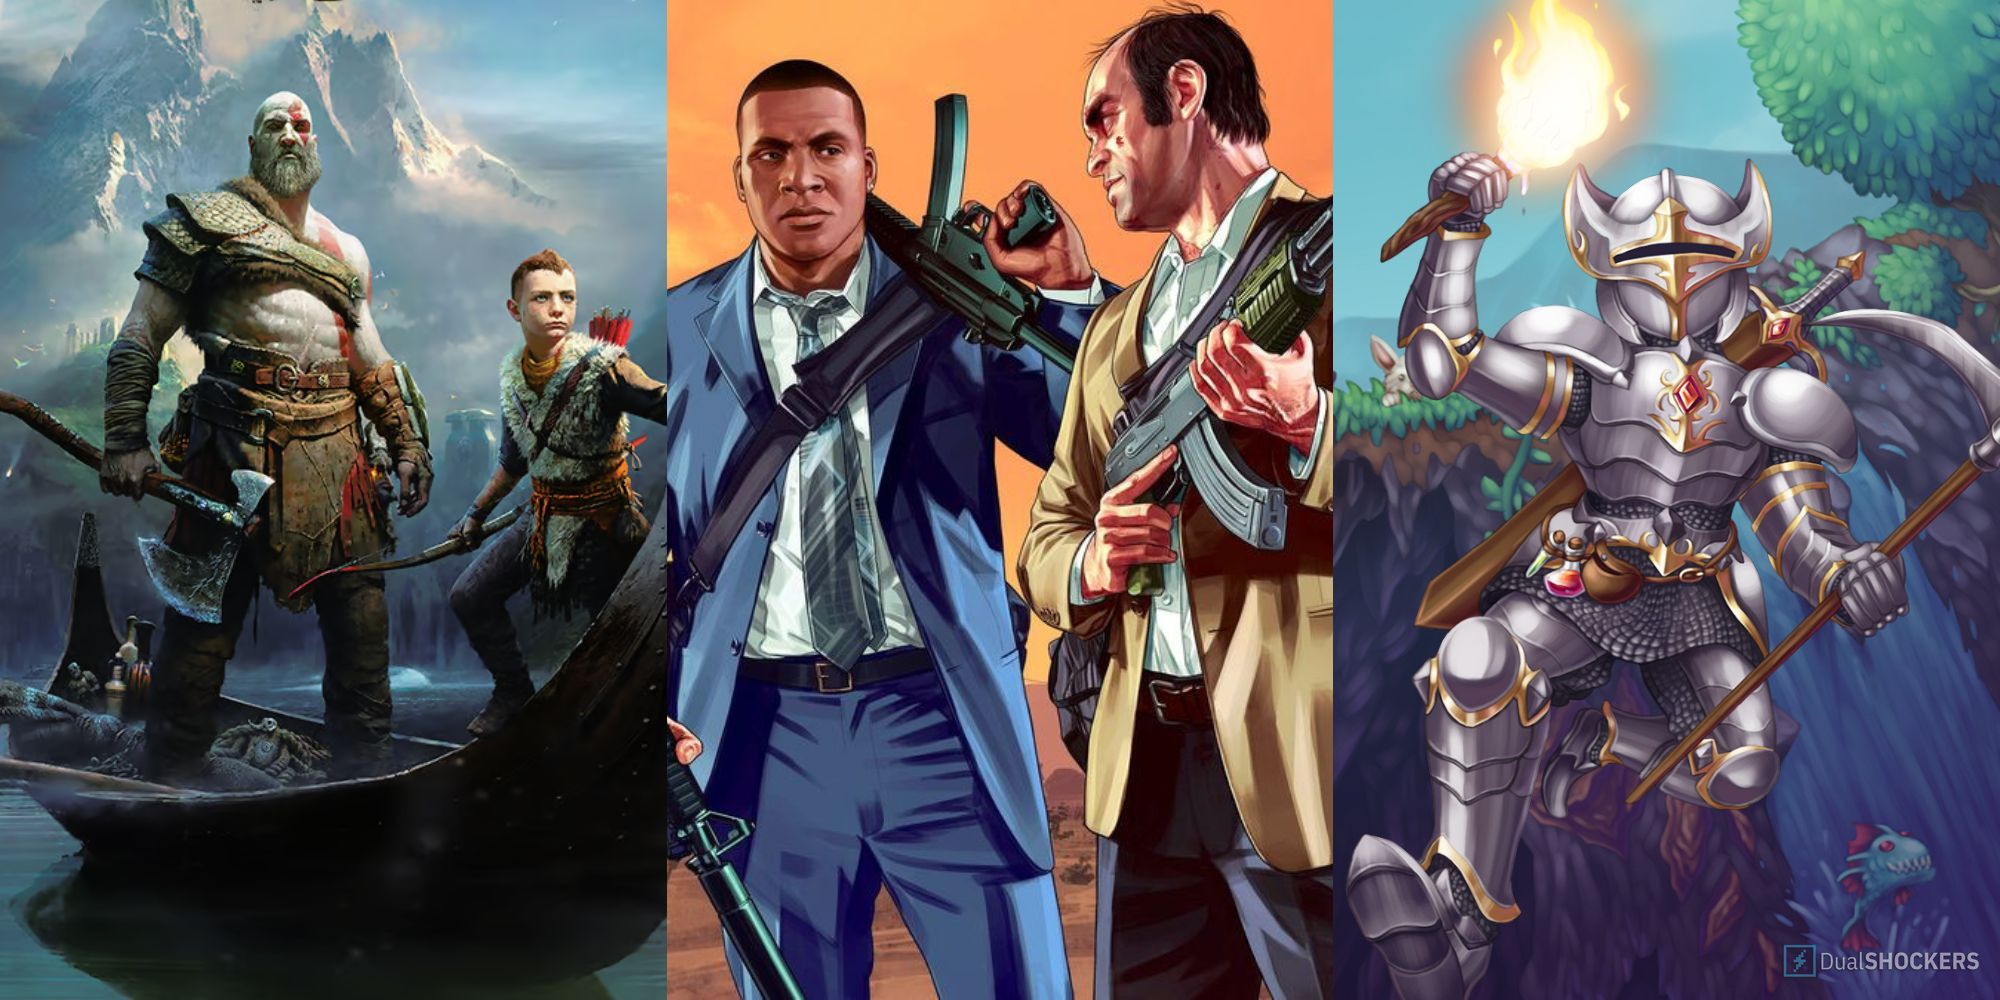 Split feature image with characters from God of War, Grand Theft Auto V, and Terraria